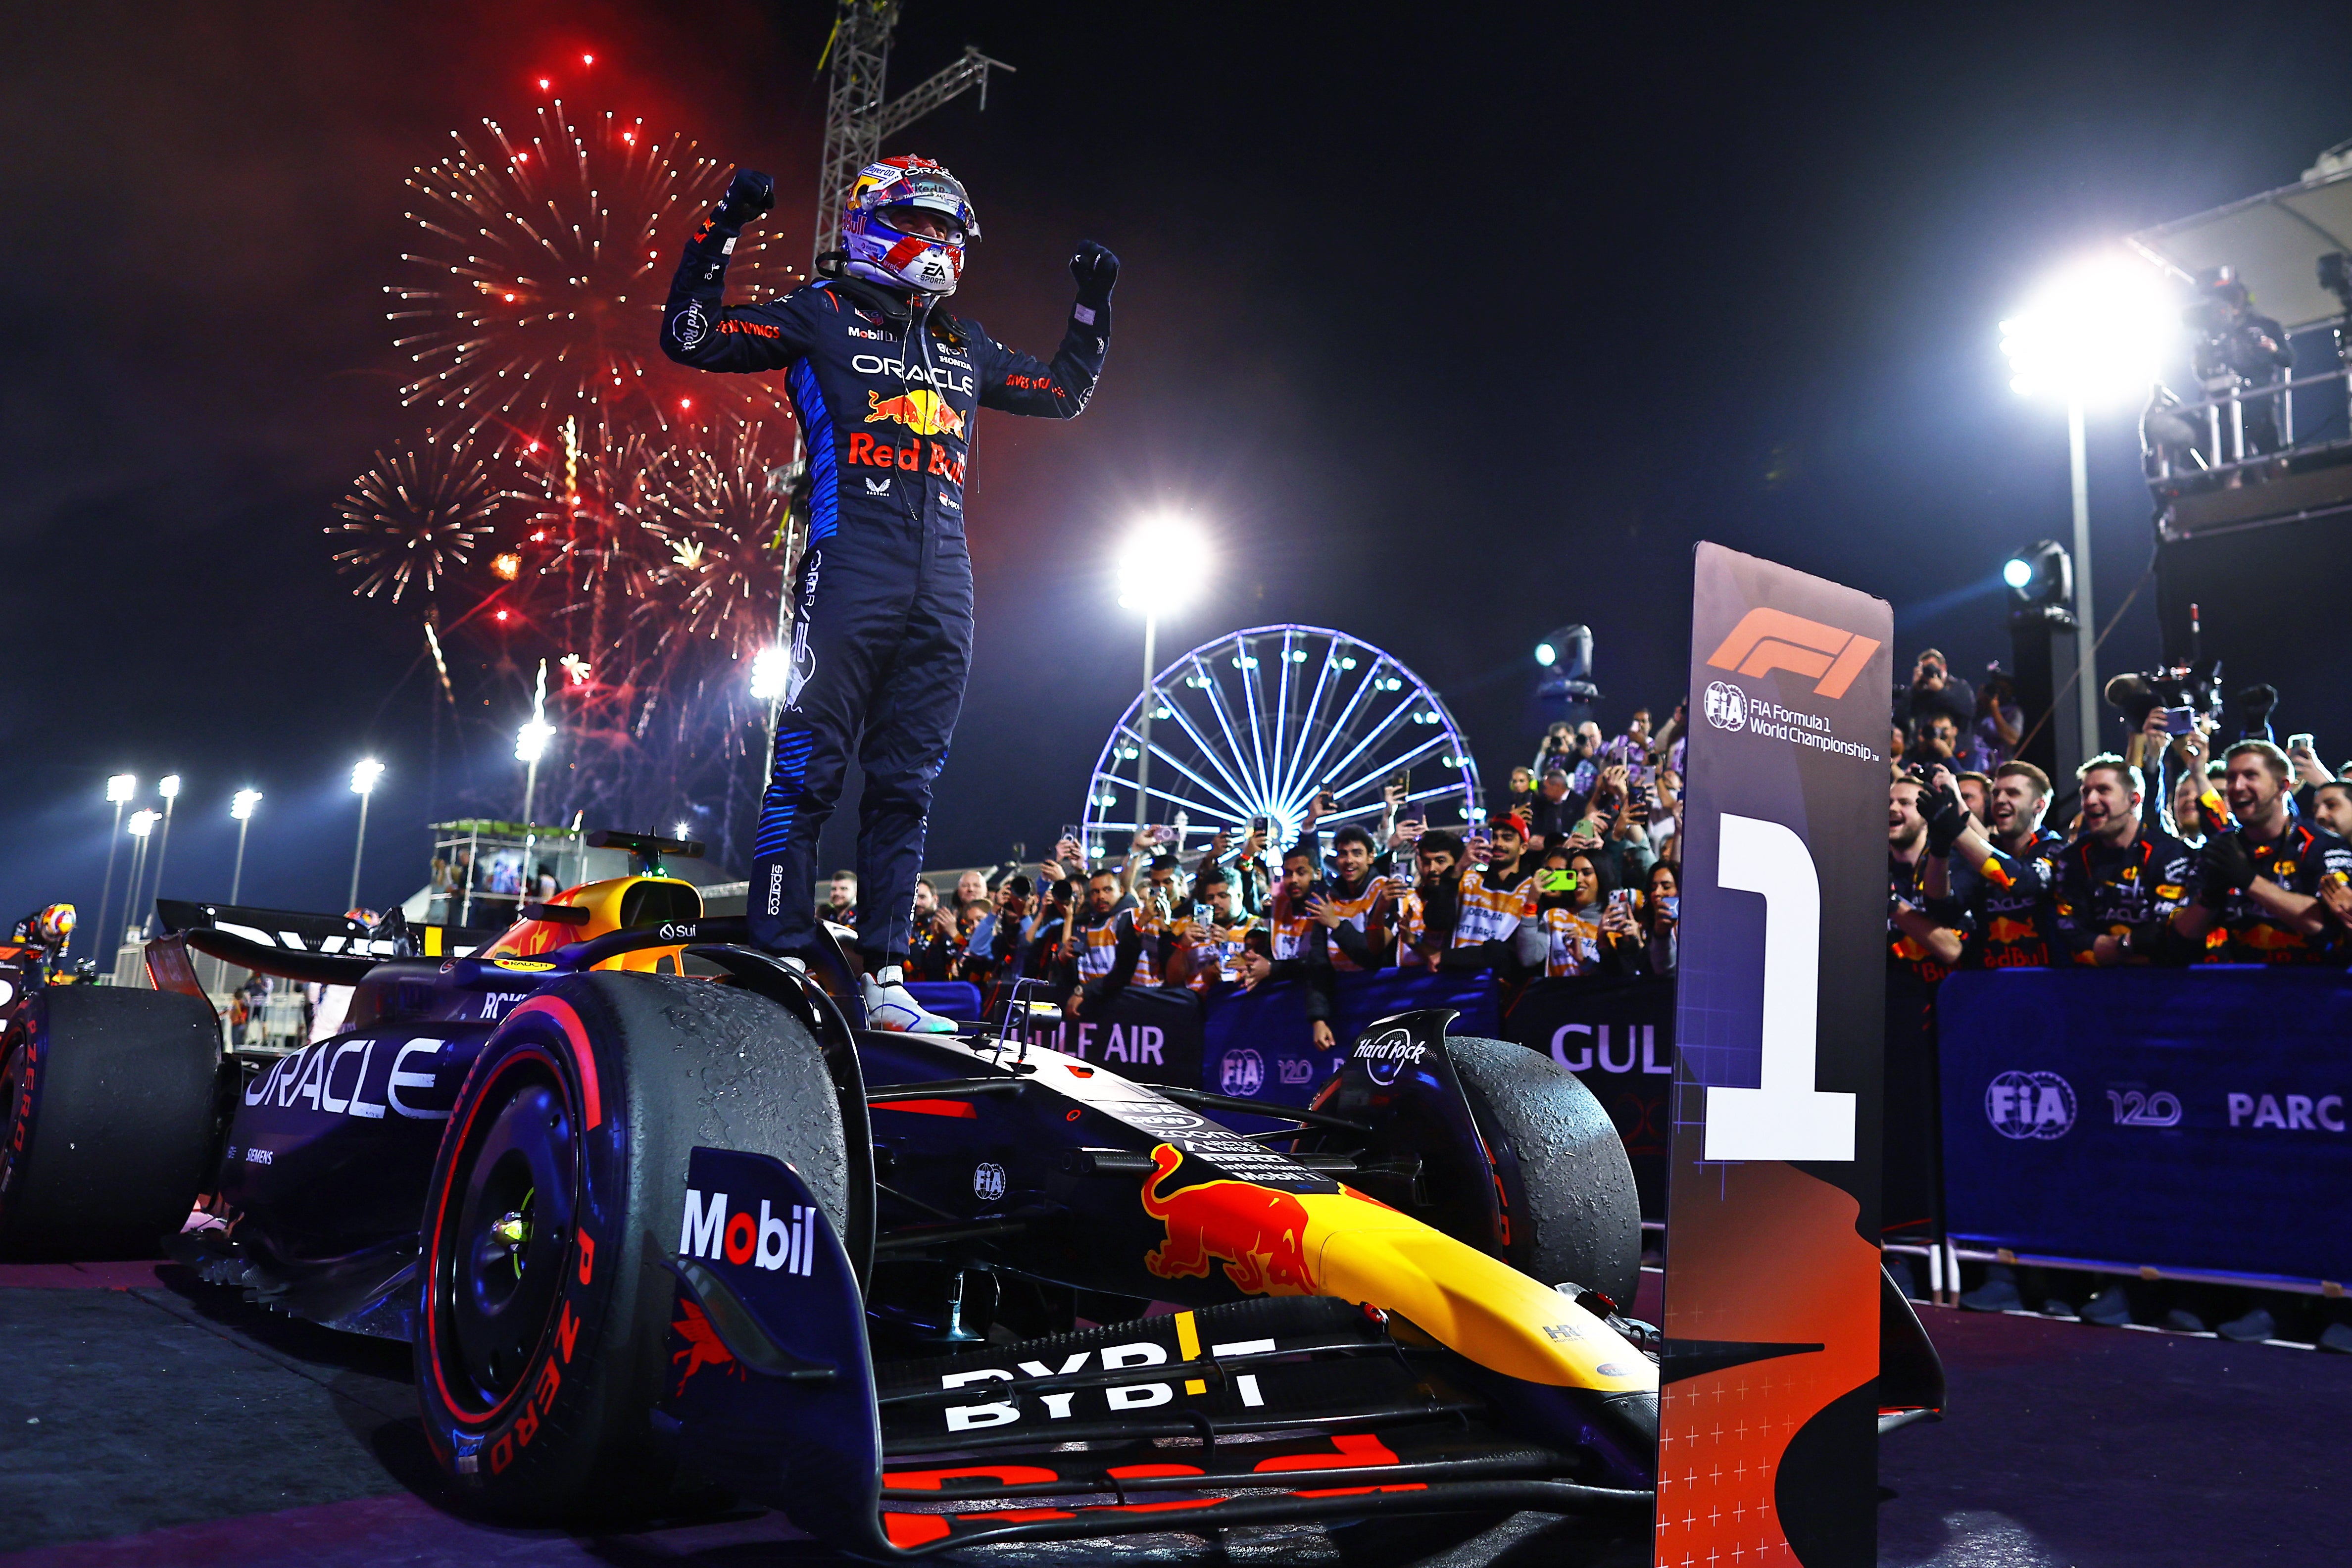 Max Verstappen cruised to victory at the season-opening Bahrain Grand Prix